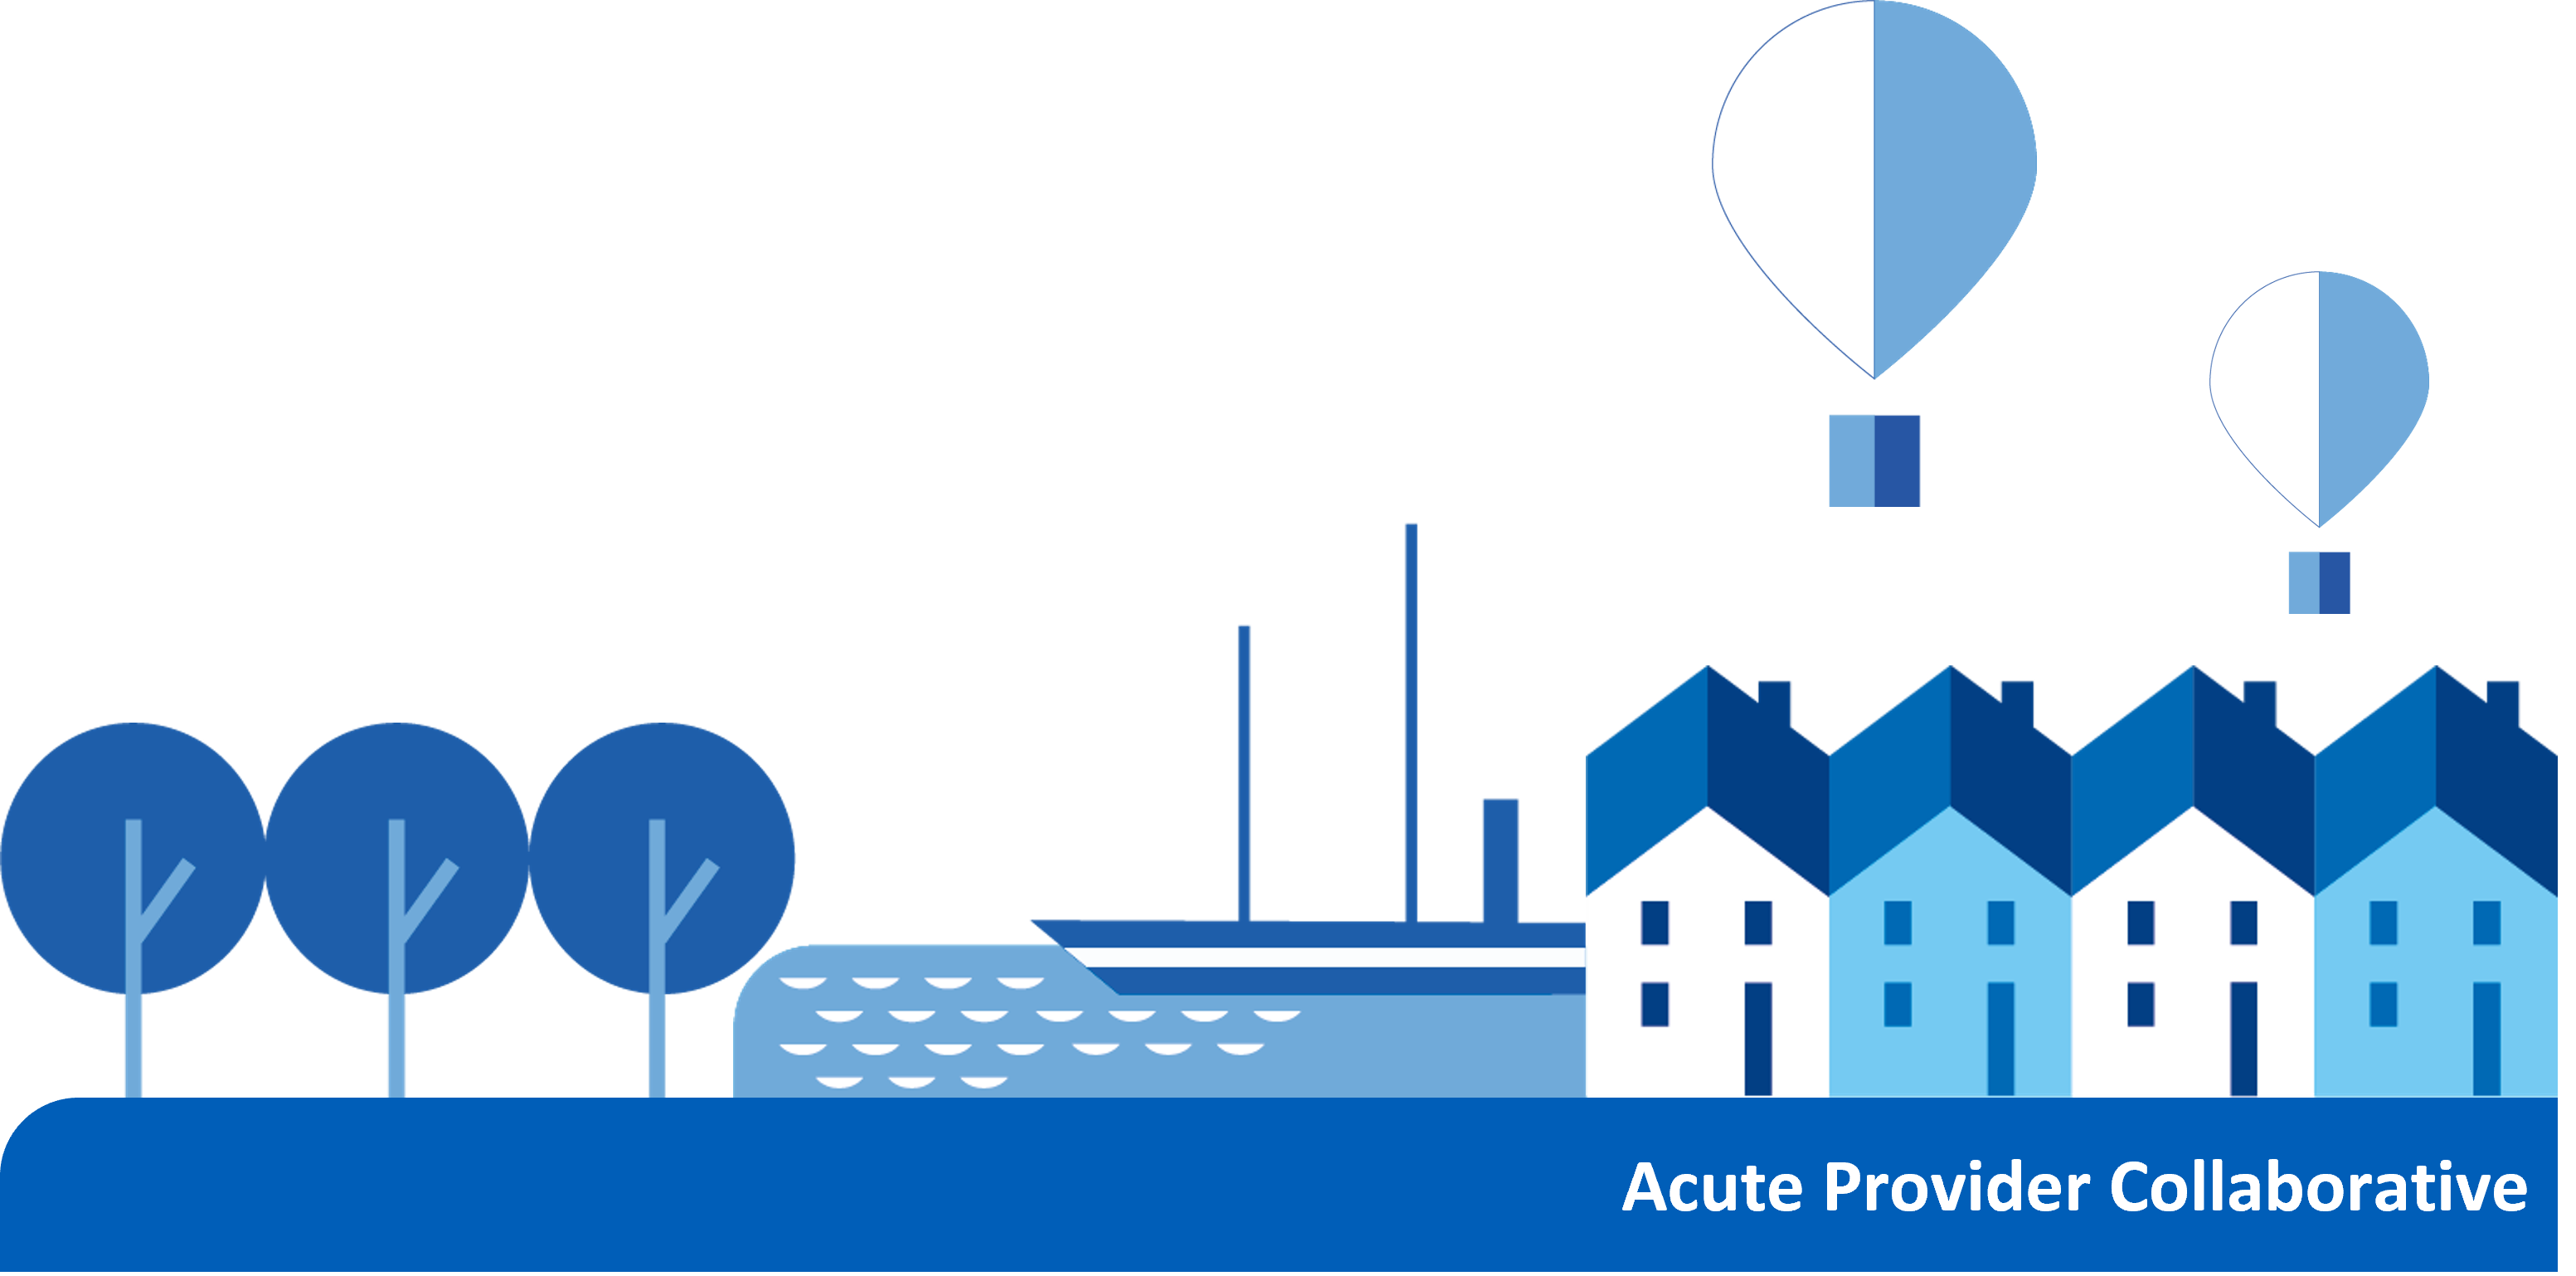 A blue graphic showing houses by the harborside in Bristol with trees and hot air balloons. A blue footer reads 'Acute Provider Collaborative'.